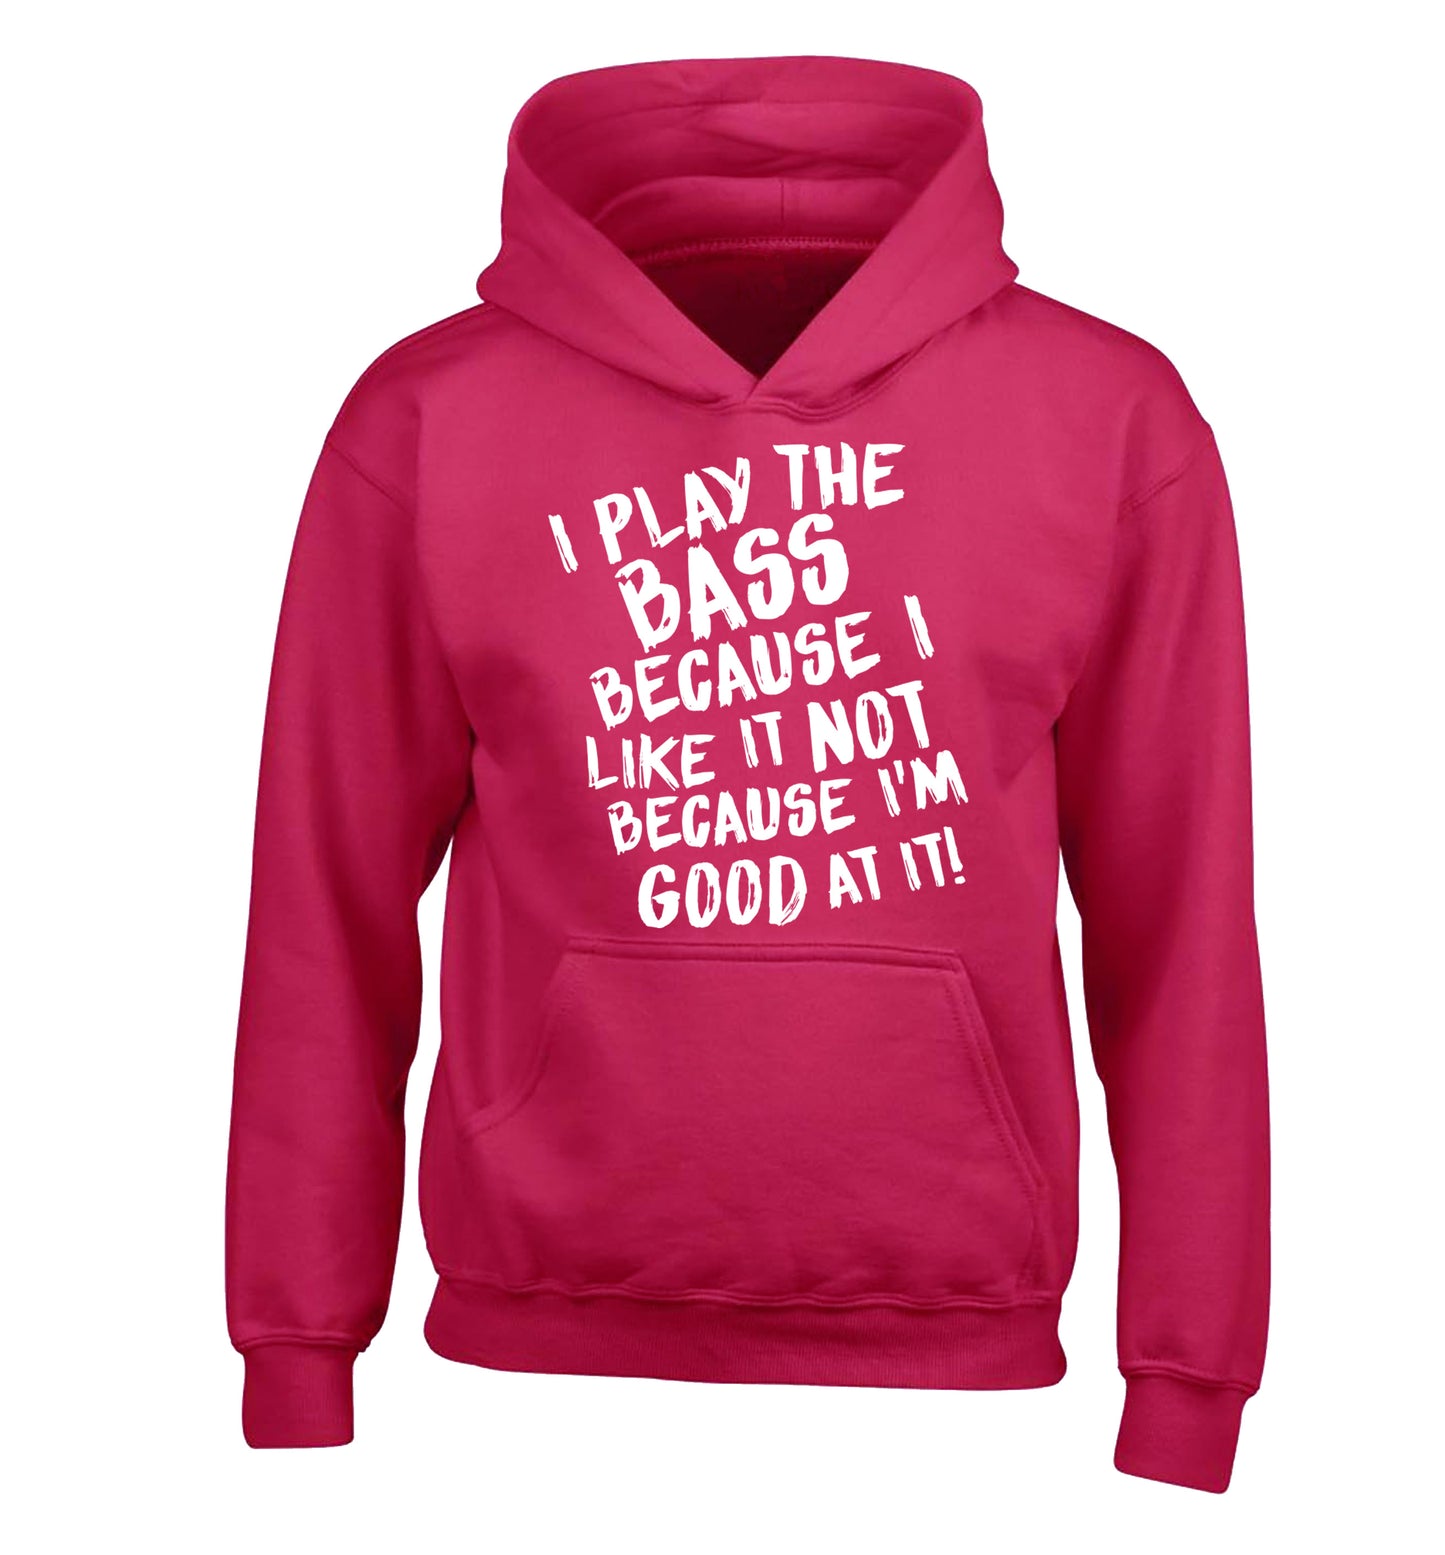 I play the bass because I like it not because I'm good at it children's pink hoodie 12-14 Years